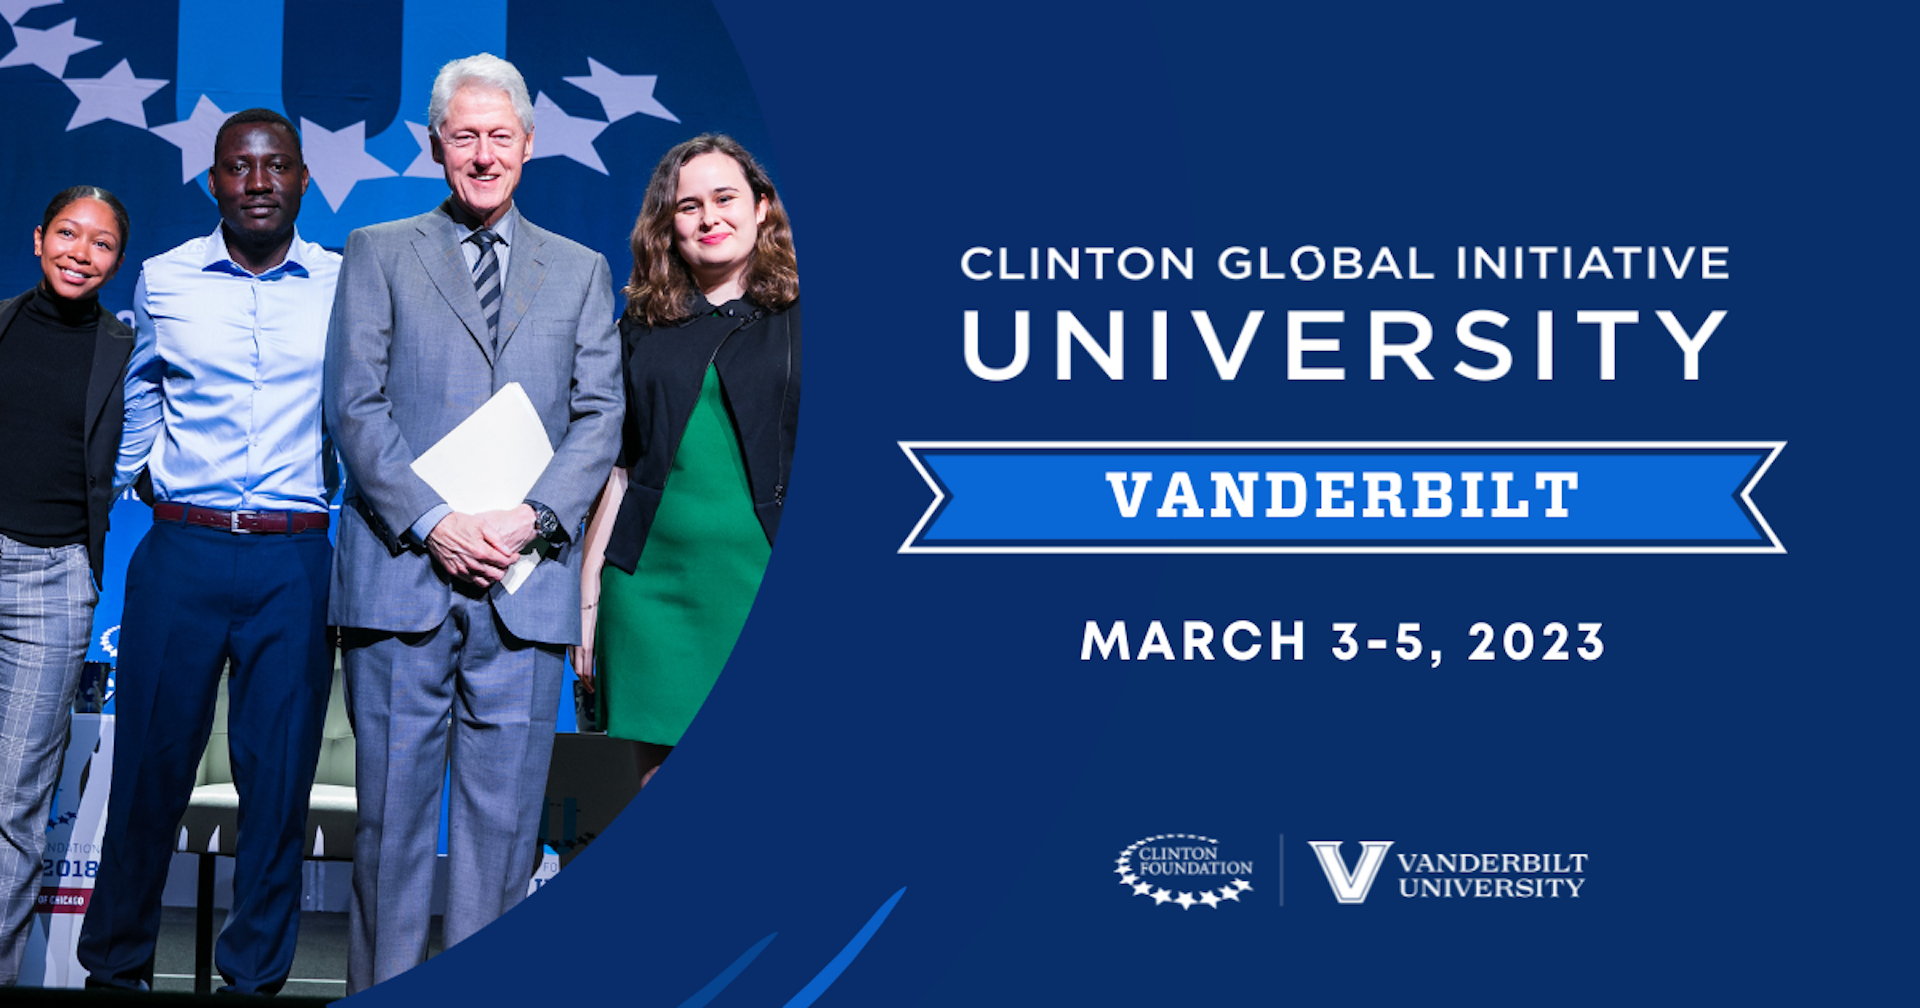 Faculty, staff, students invited to participate in Clinton Global Initiative University programming March 3–5